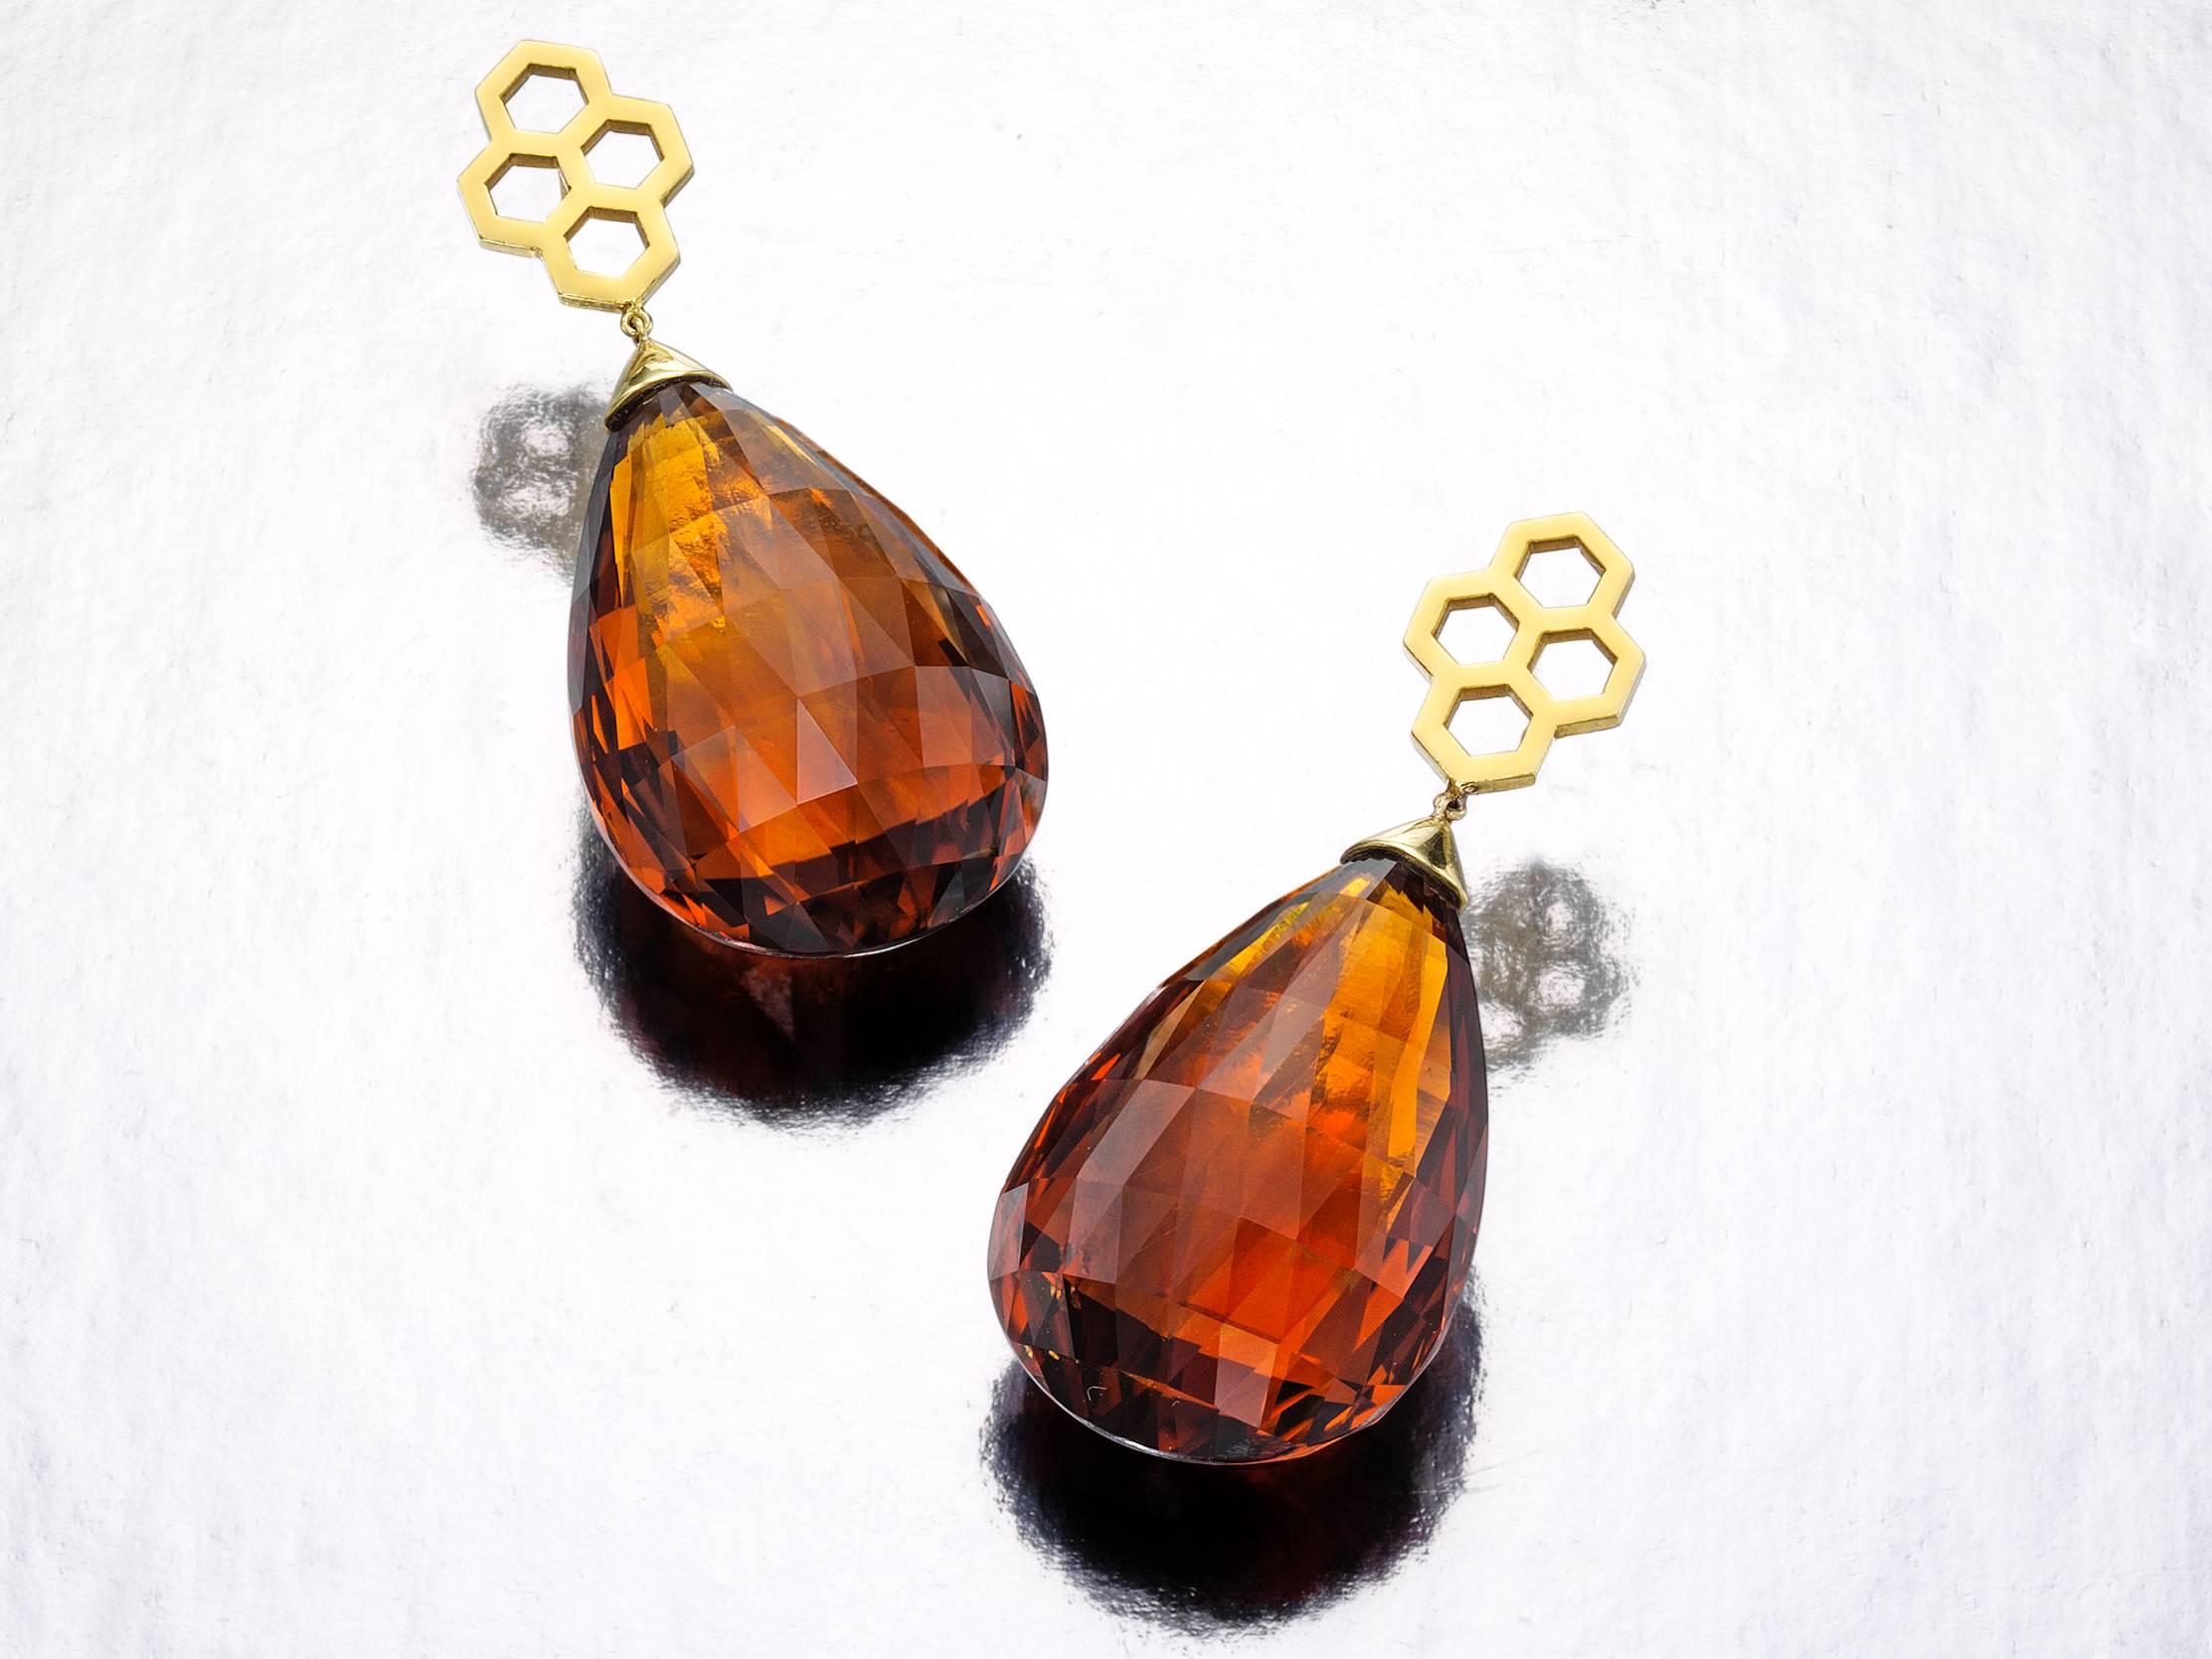 18K yellow gold with approximately 60 cts of clear and bright faceted tear drop shaped Madeira Citrines.  These earrings are two inches in length and contemporary in design.